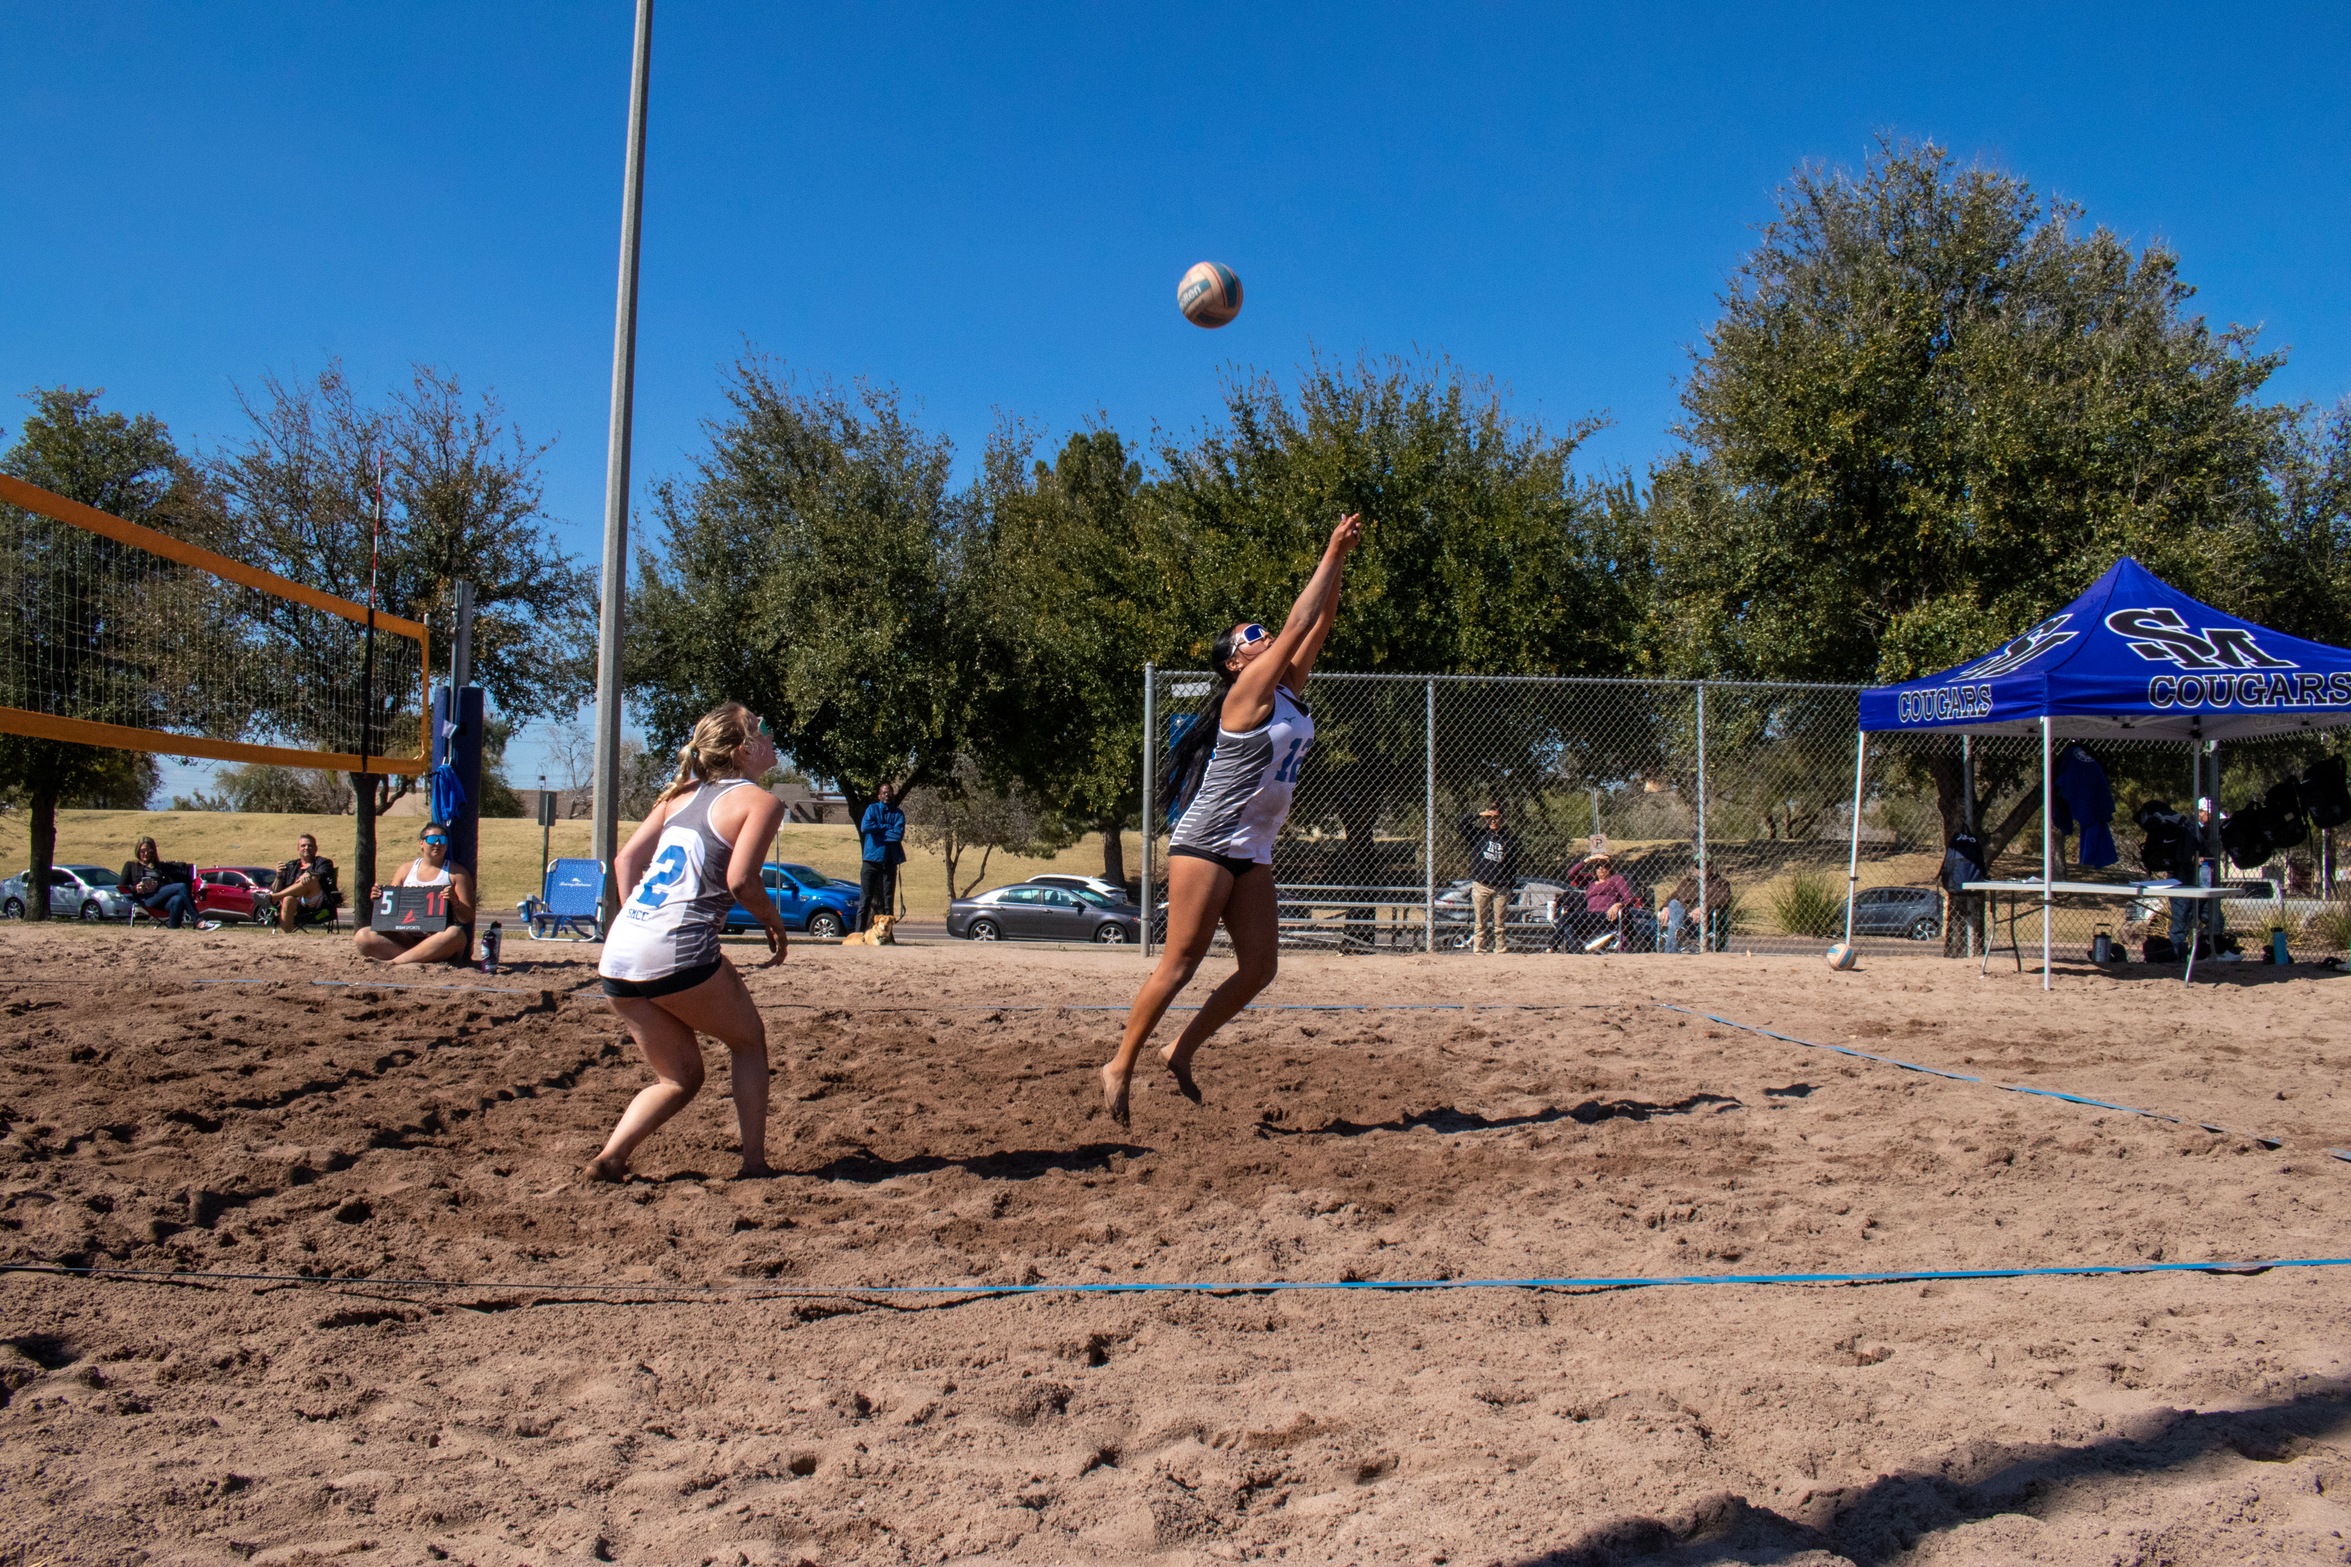 SMCC Sweeps Matches with Trinidad State